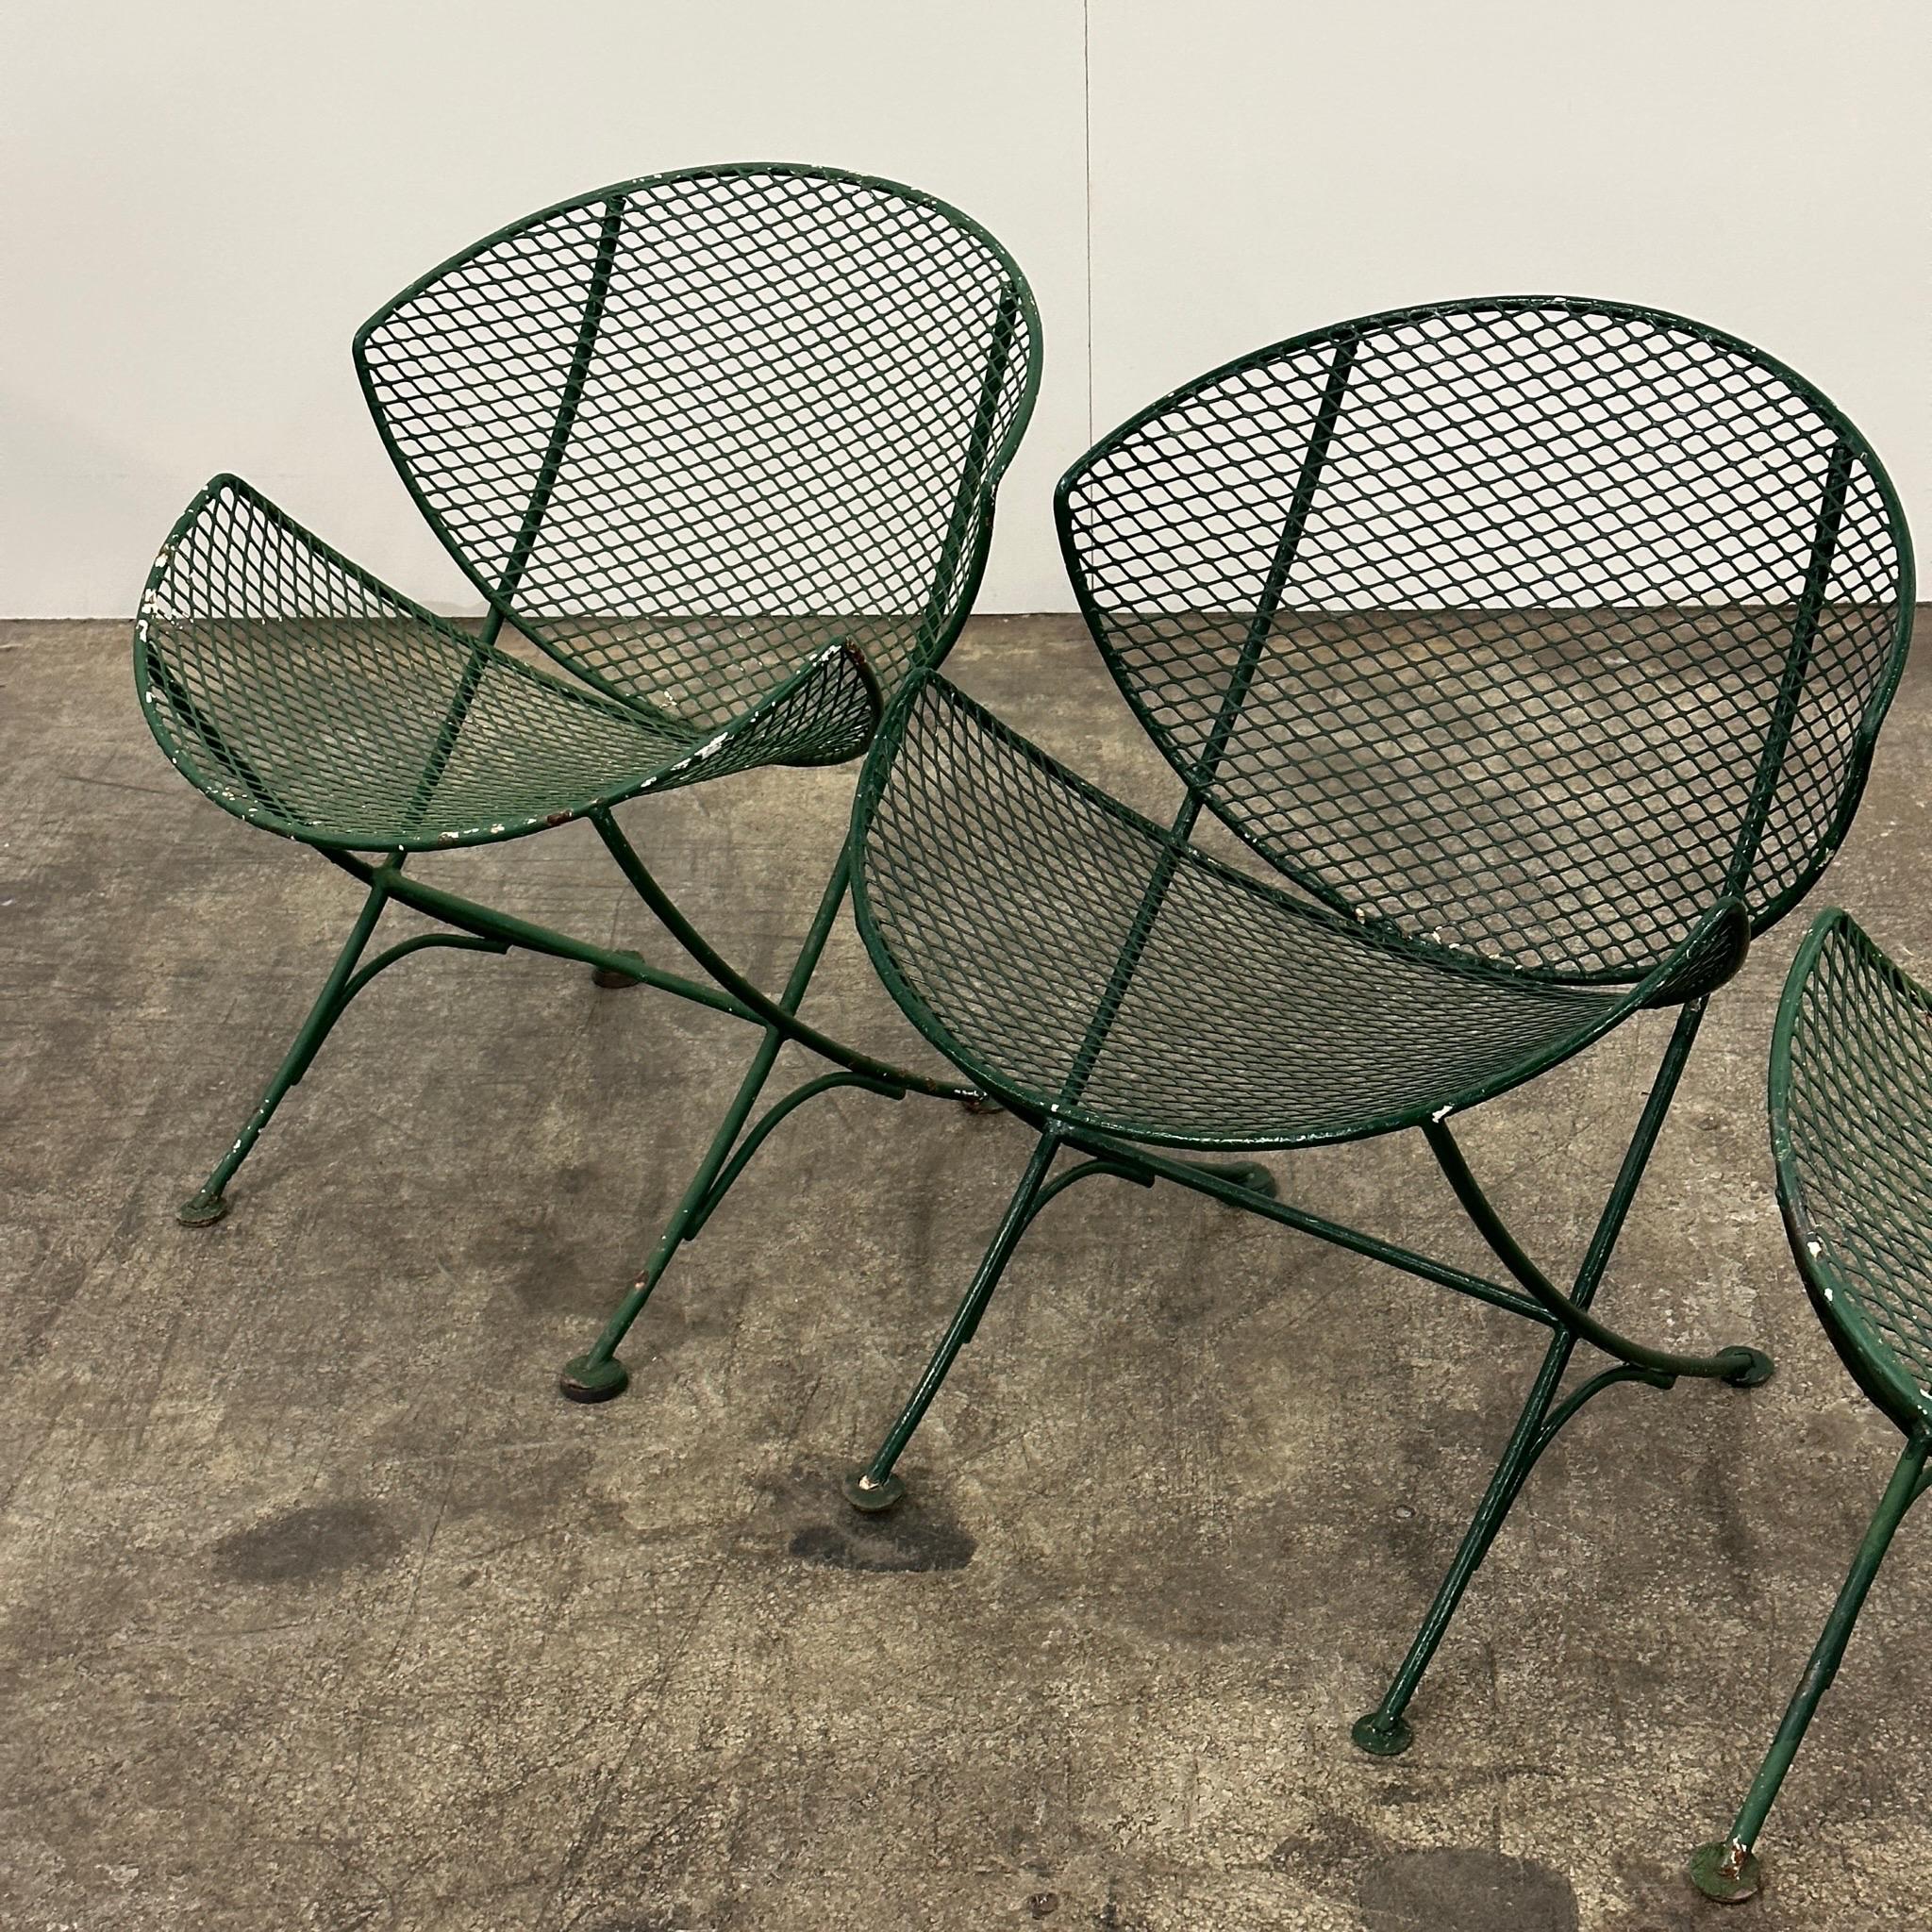 c. 1950s. Price is for the set. Contact us if you’d like to purchase a single item. Previously painted green. 